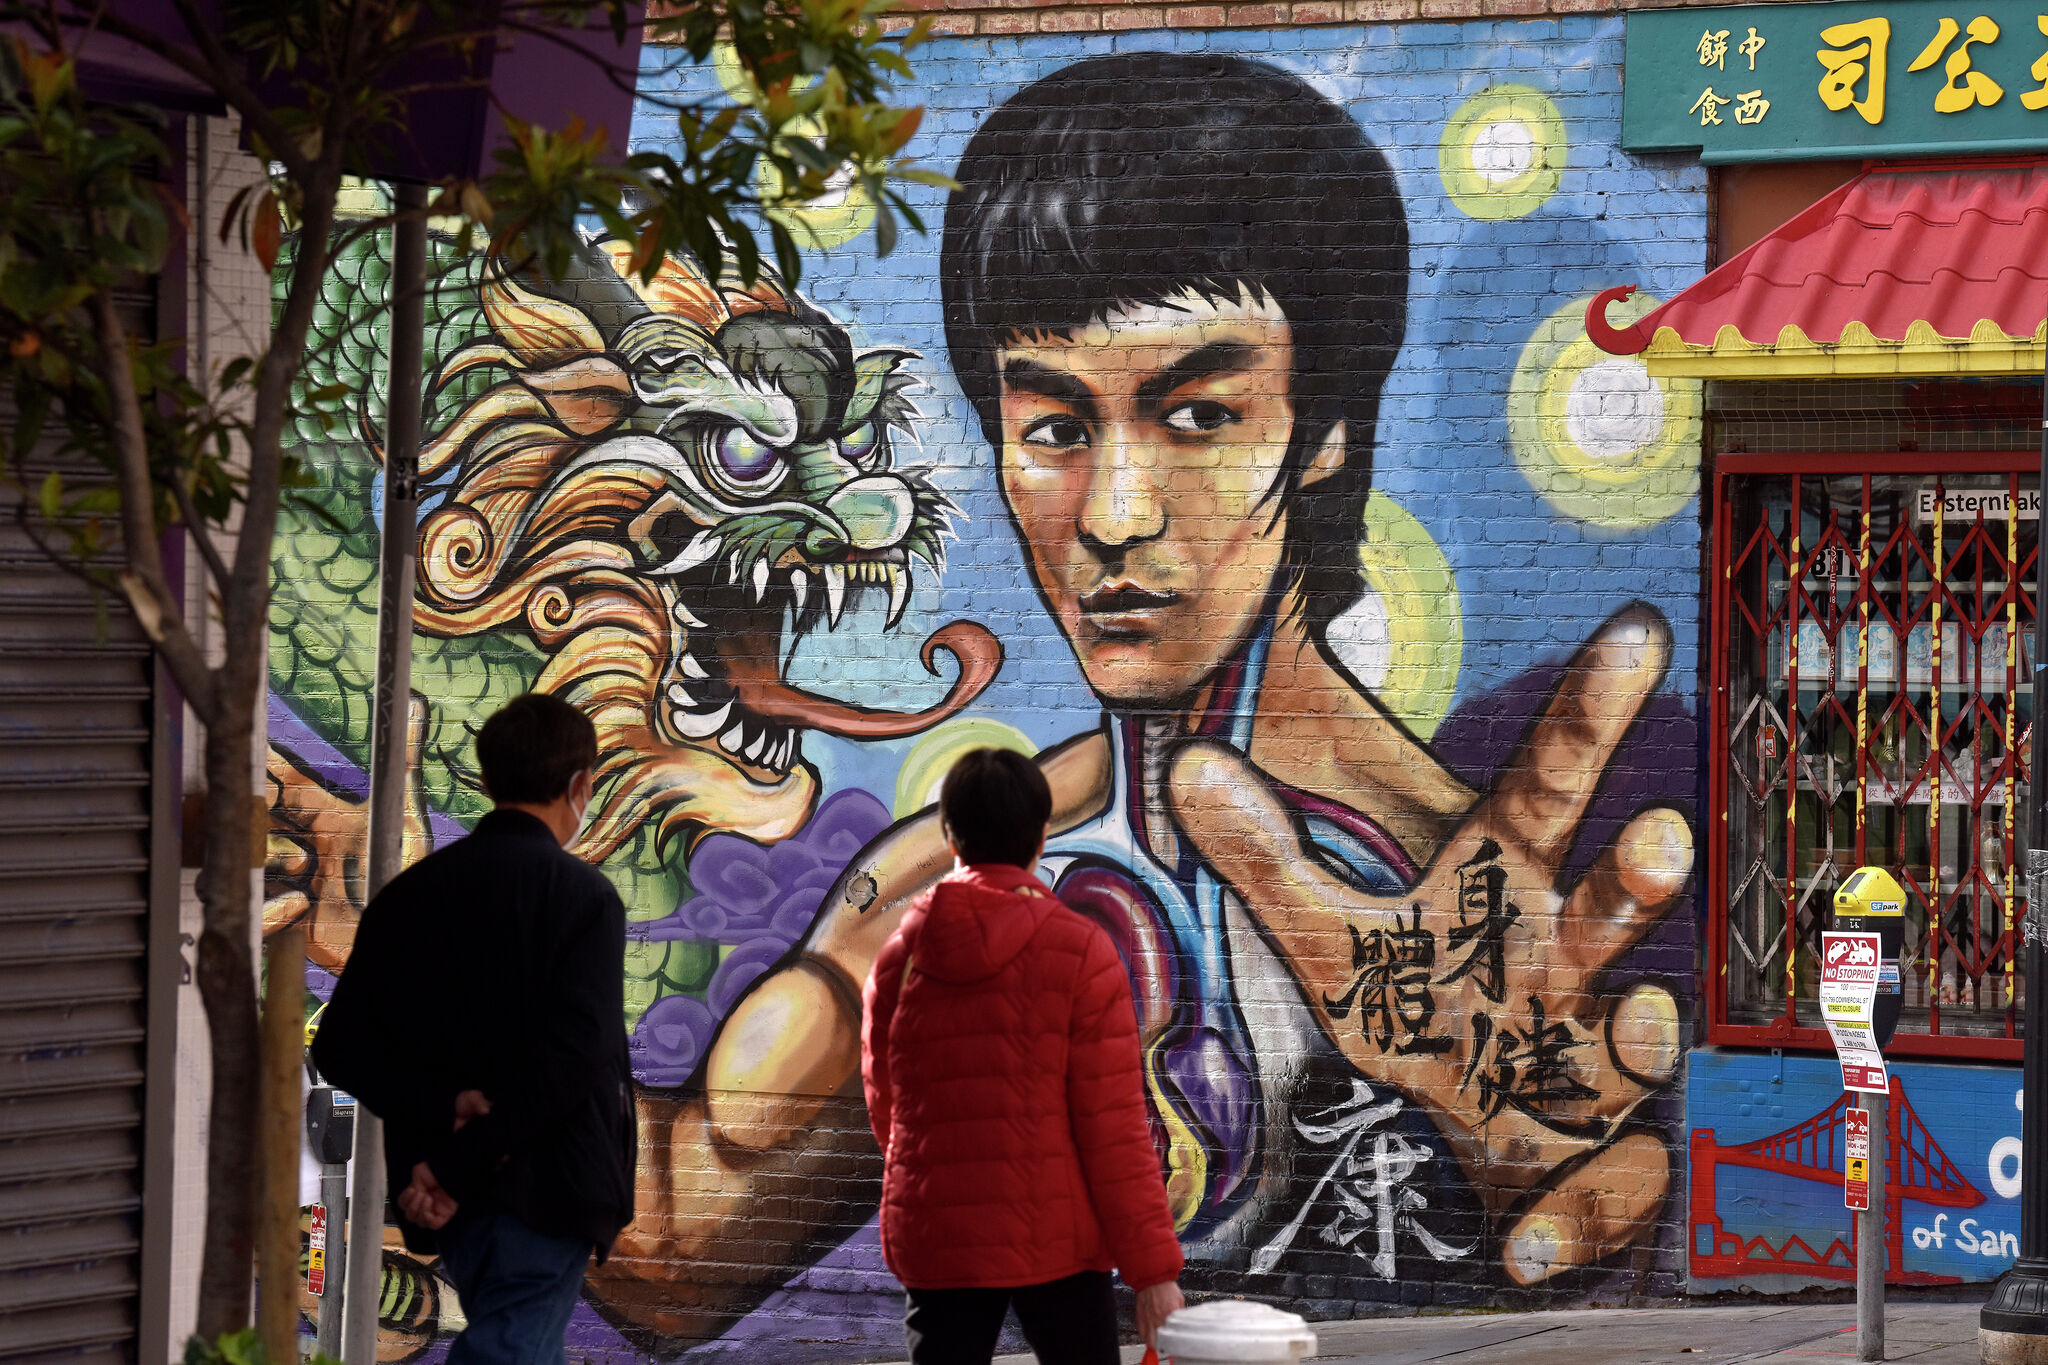 A Bruce Lee walking tour of San Francisco's Chinatown